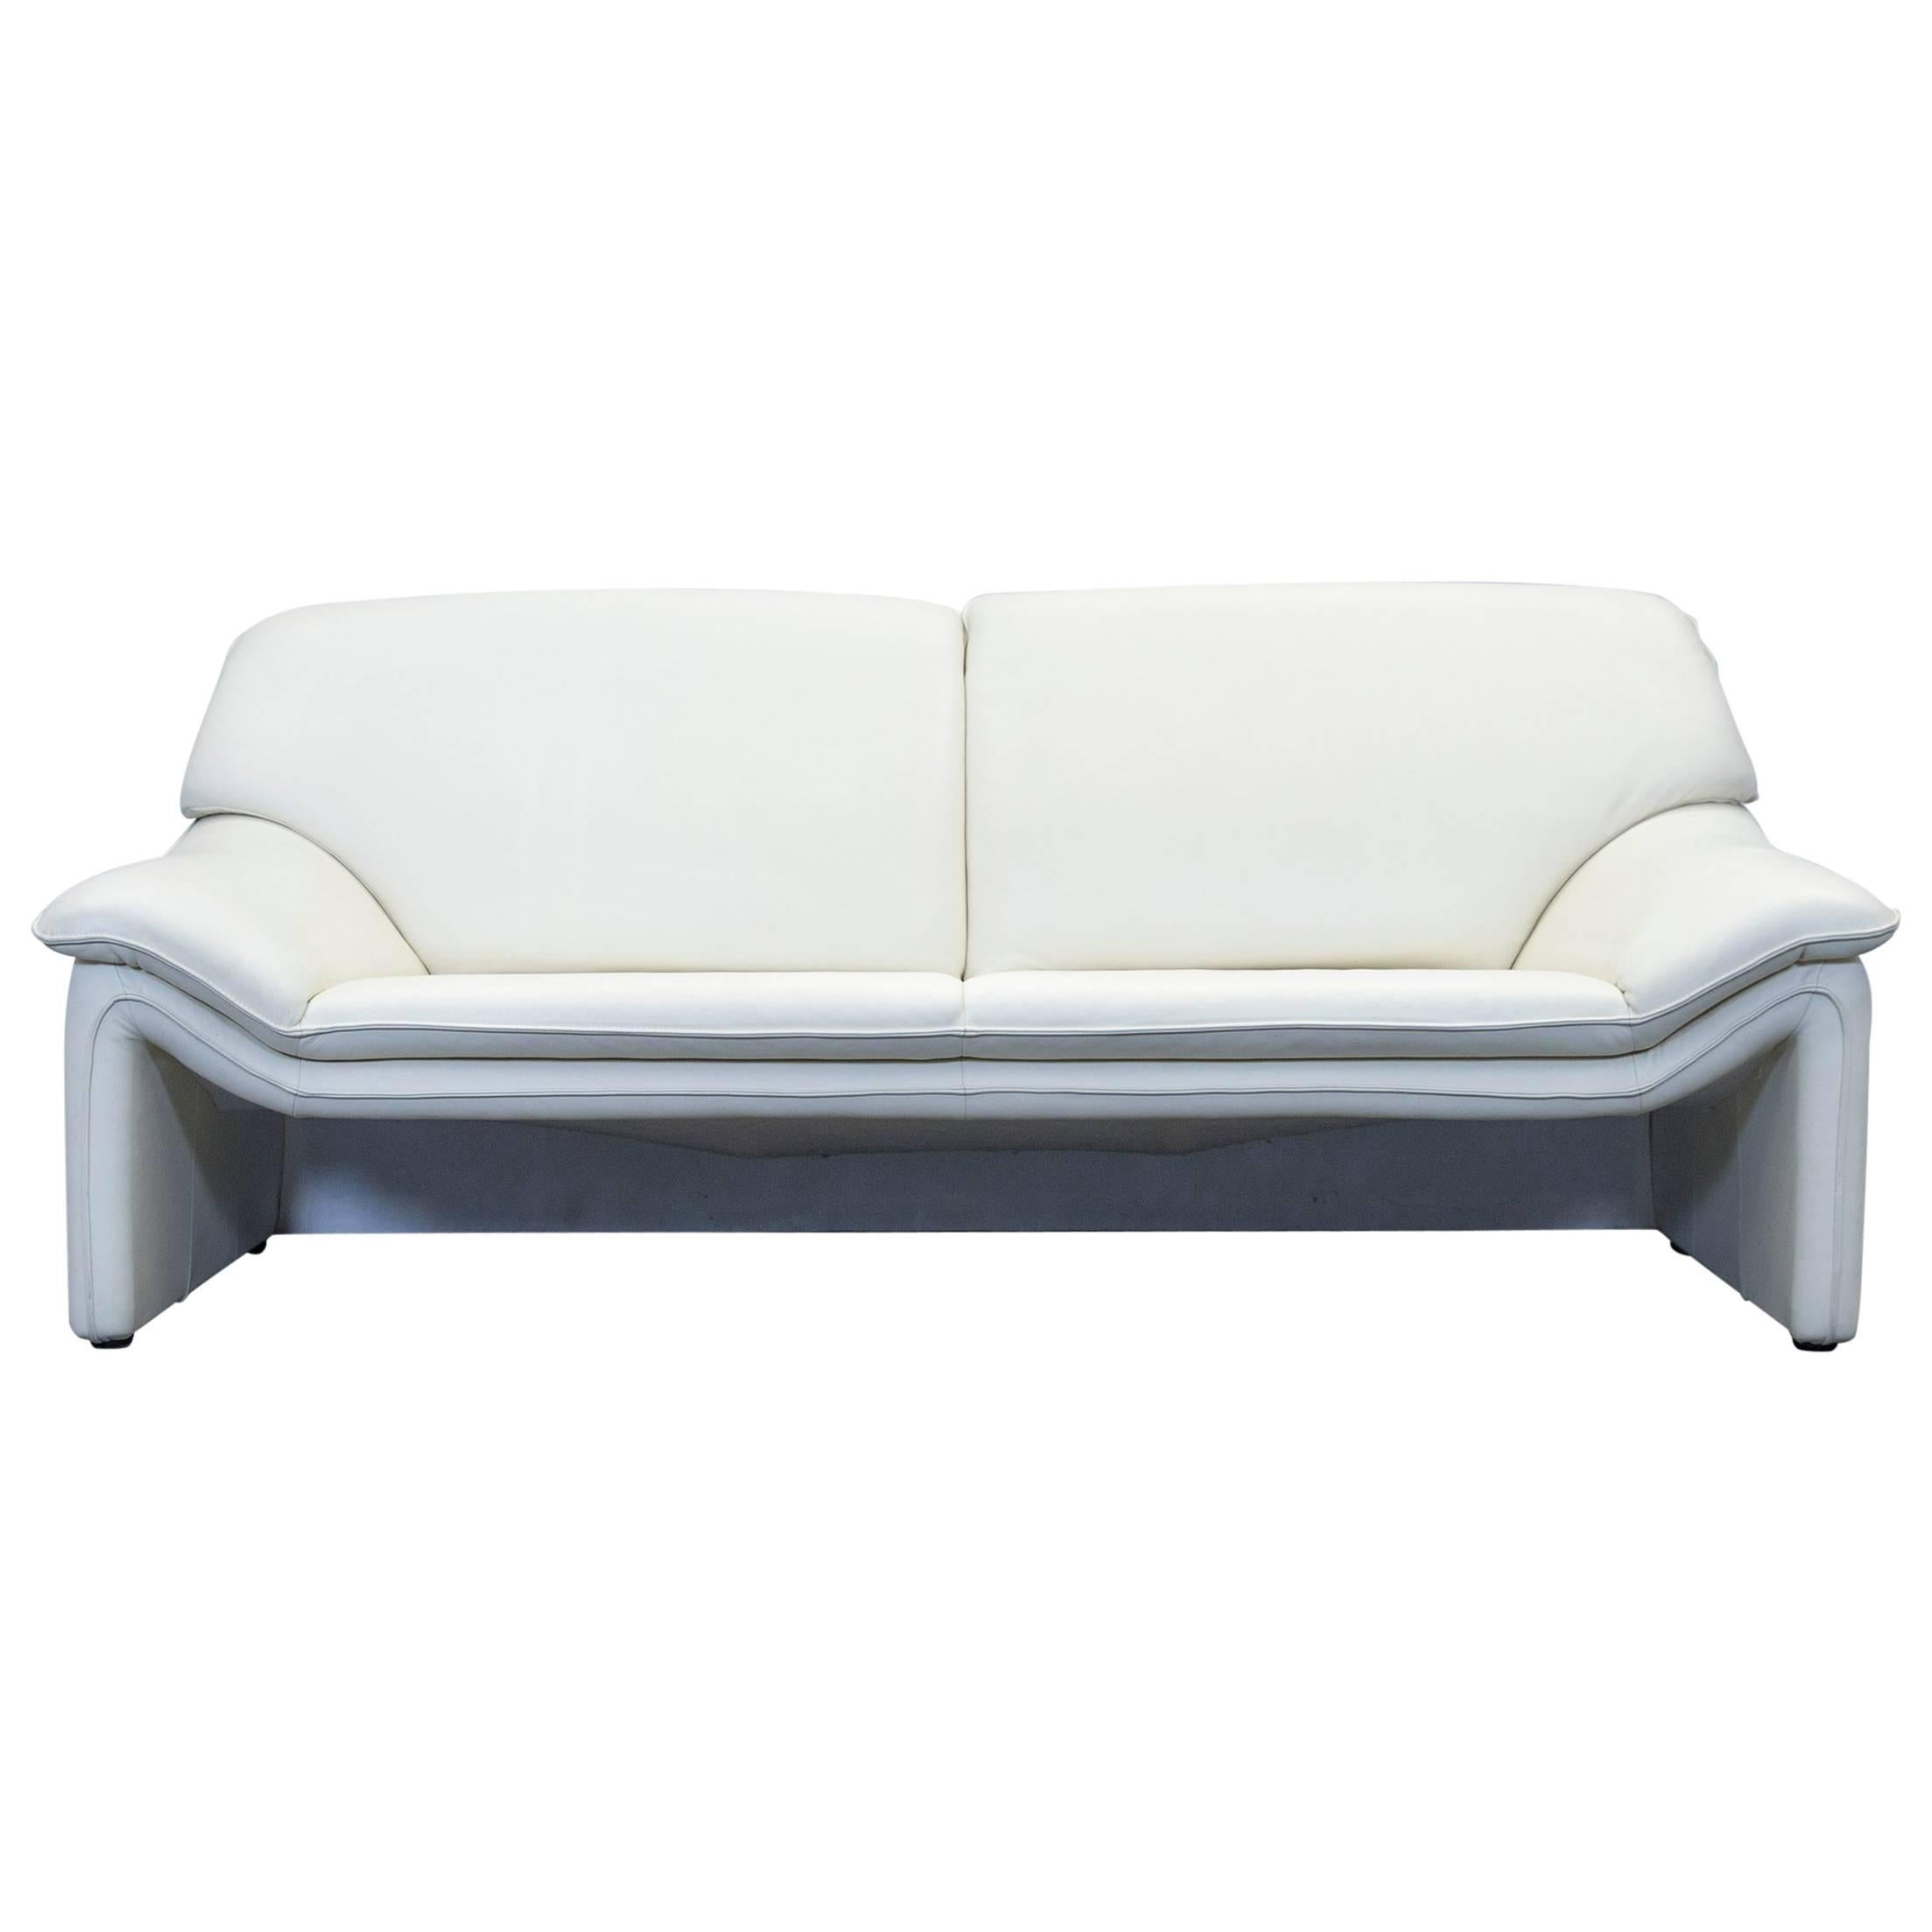 Laauser Atlanta Designer Sofa Leather Crème Two-Seat Couch Modern For Sale